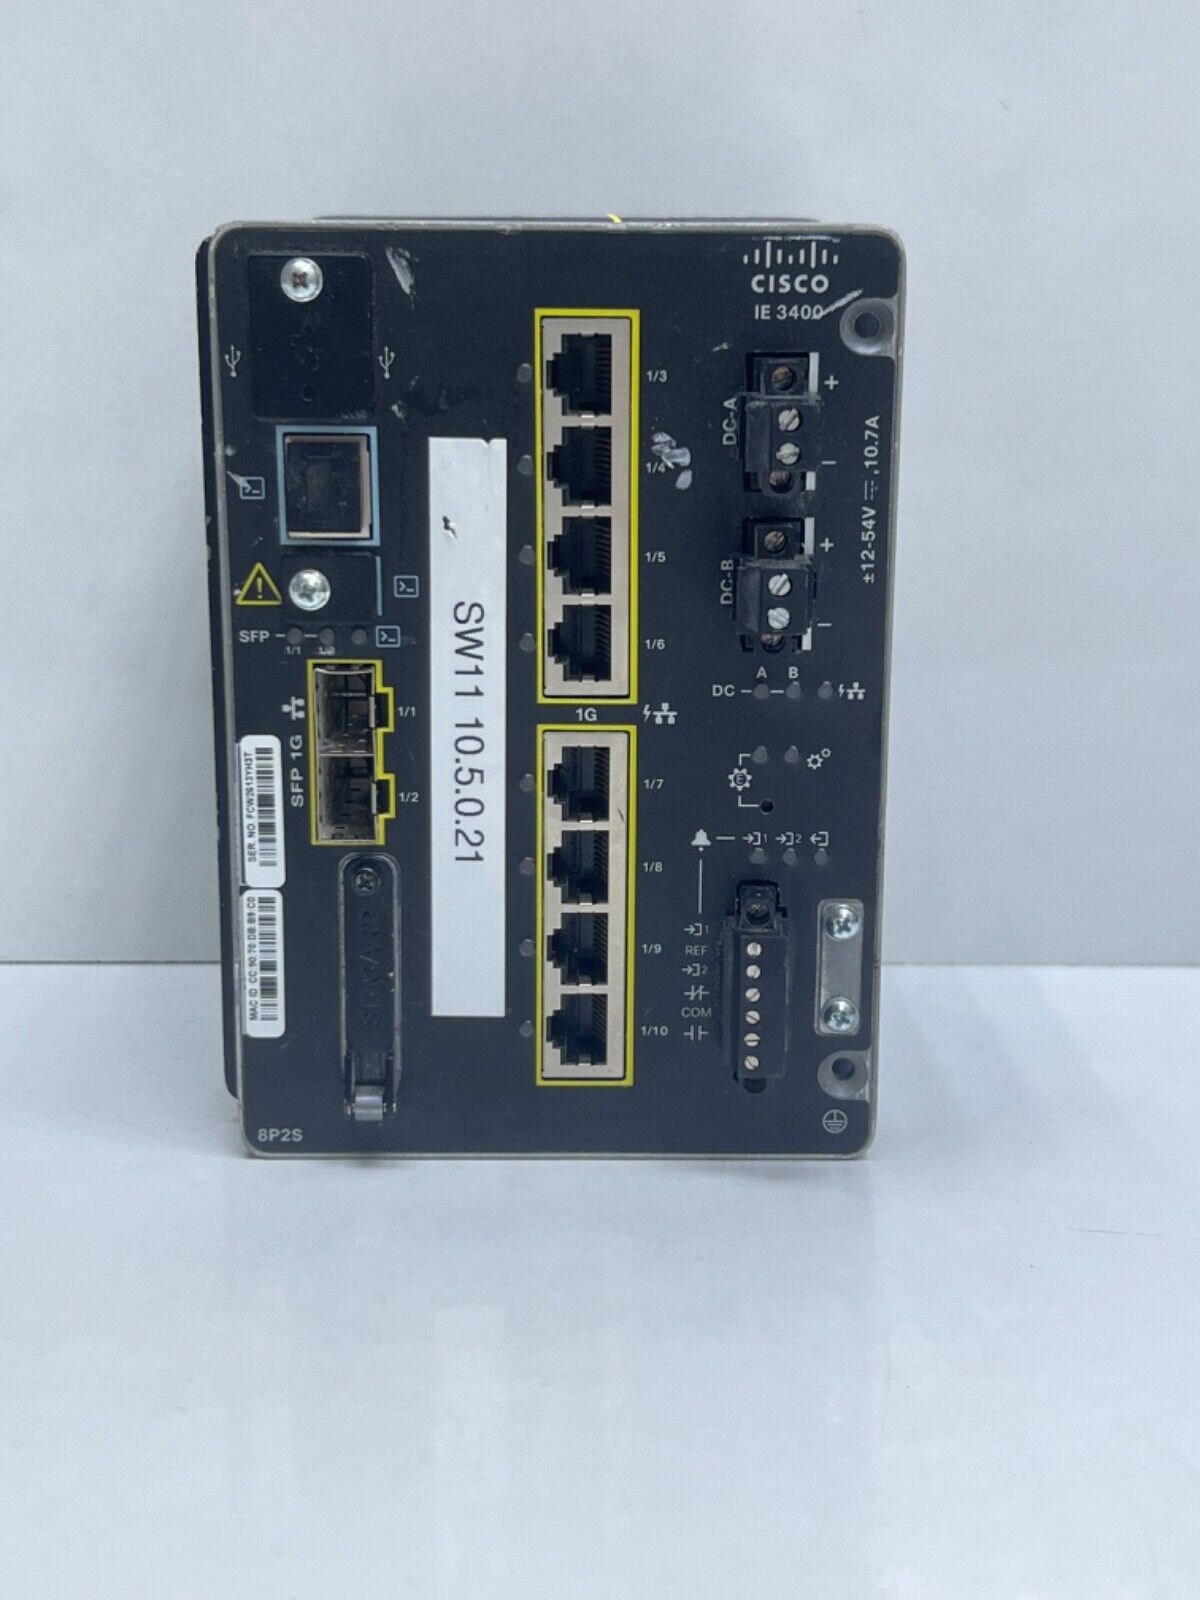 CISCO IE-3400-8P2S-A INDUSTRIAL ETHERNET SWITCH